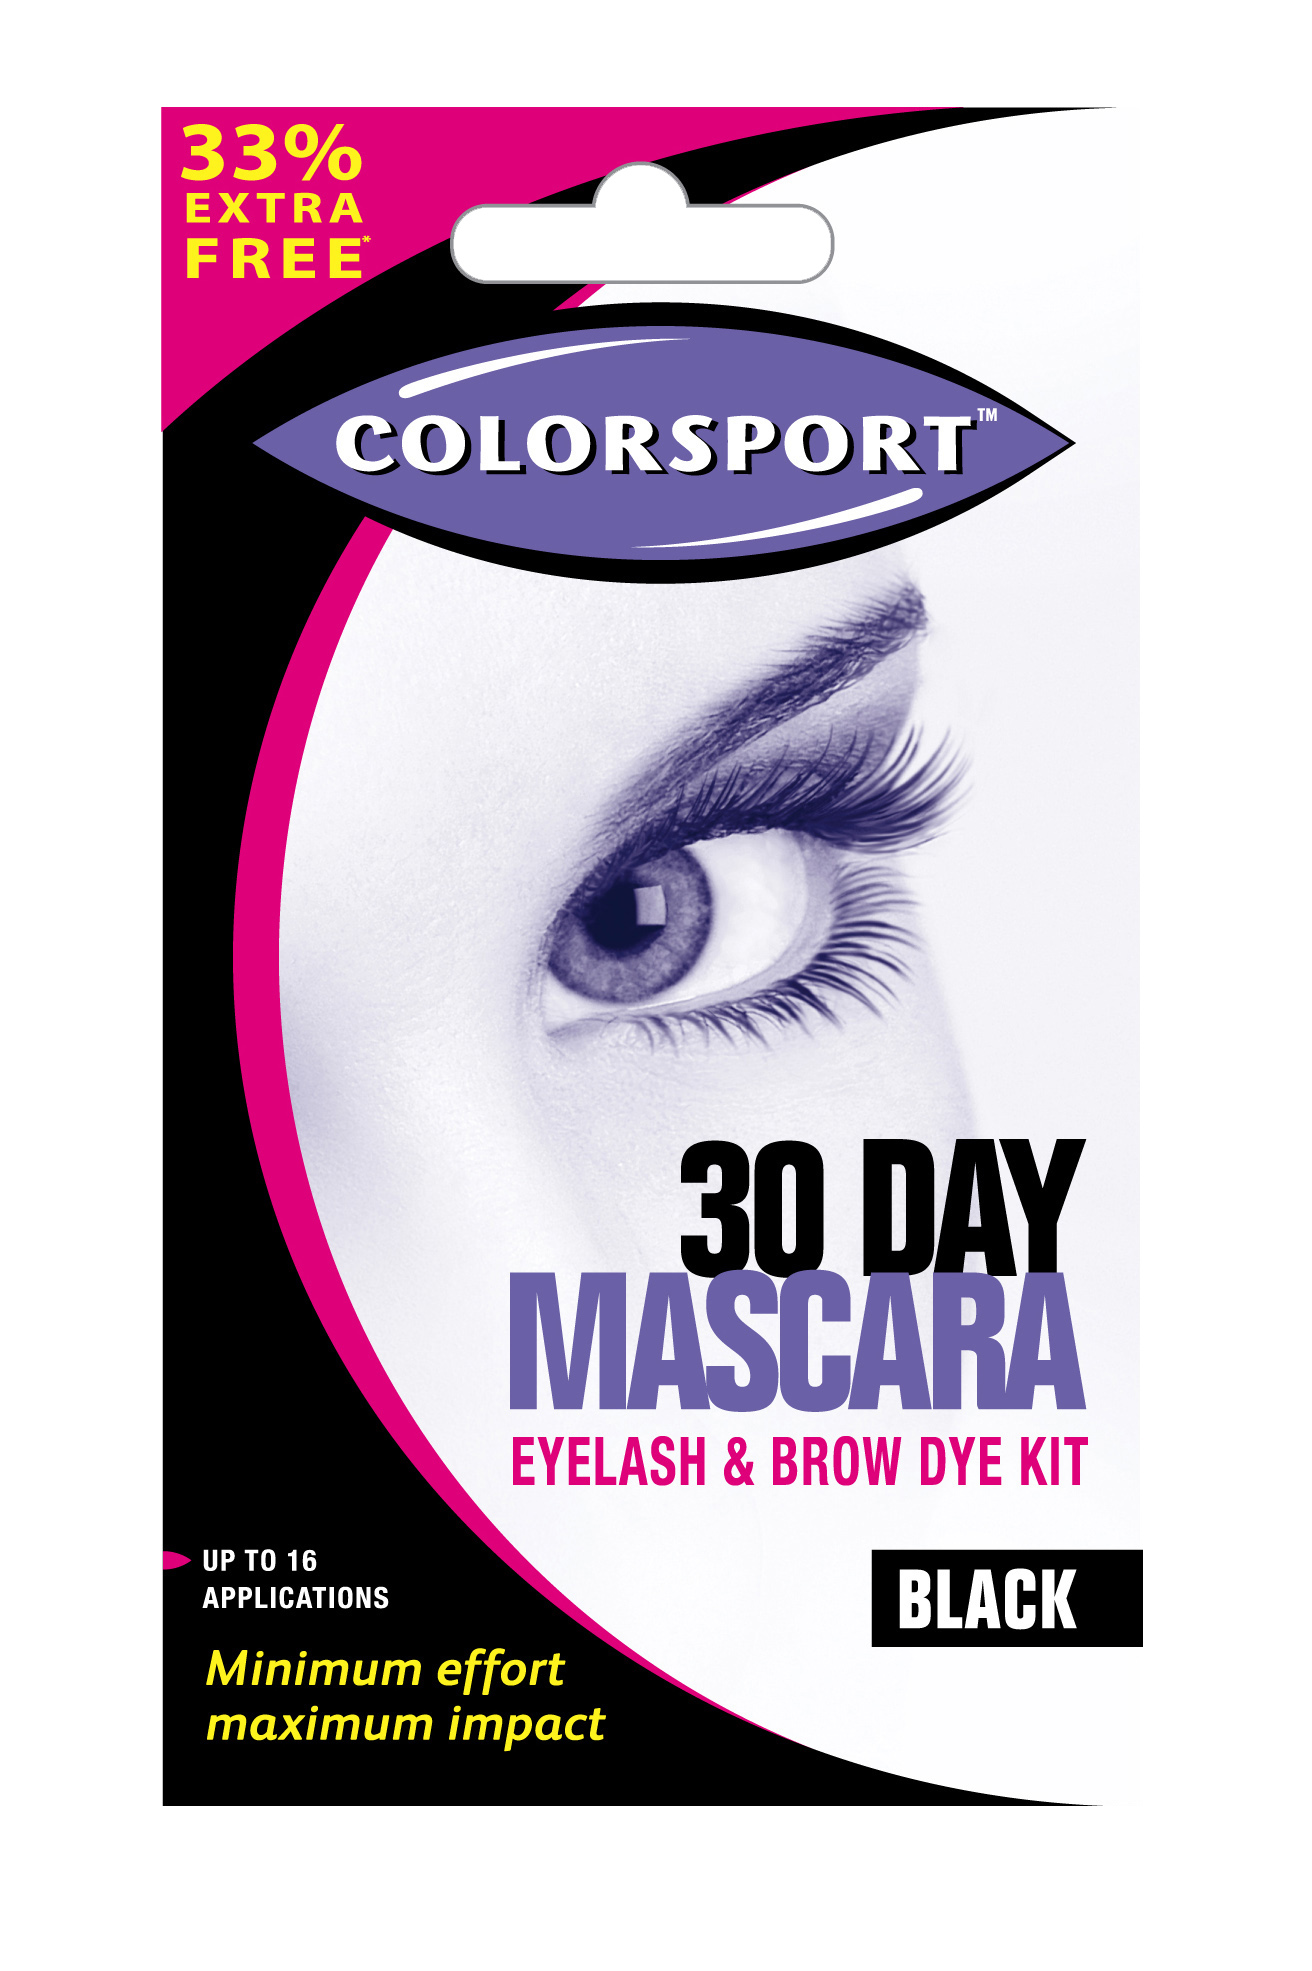 Colorsport 30 day mascara